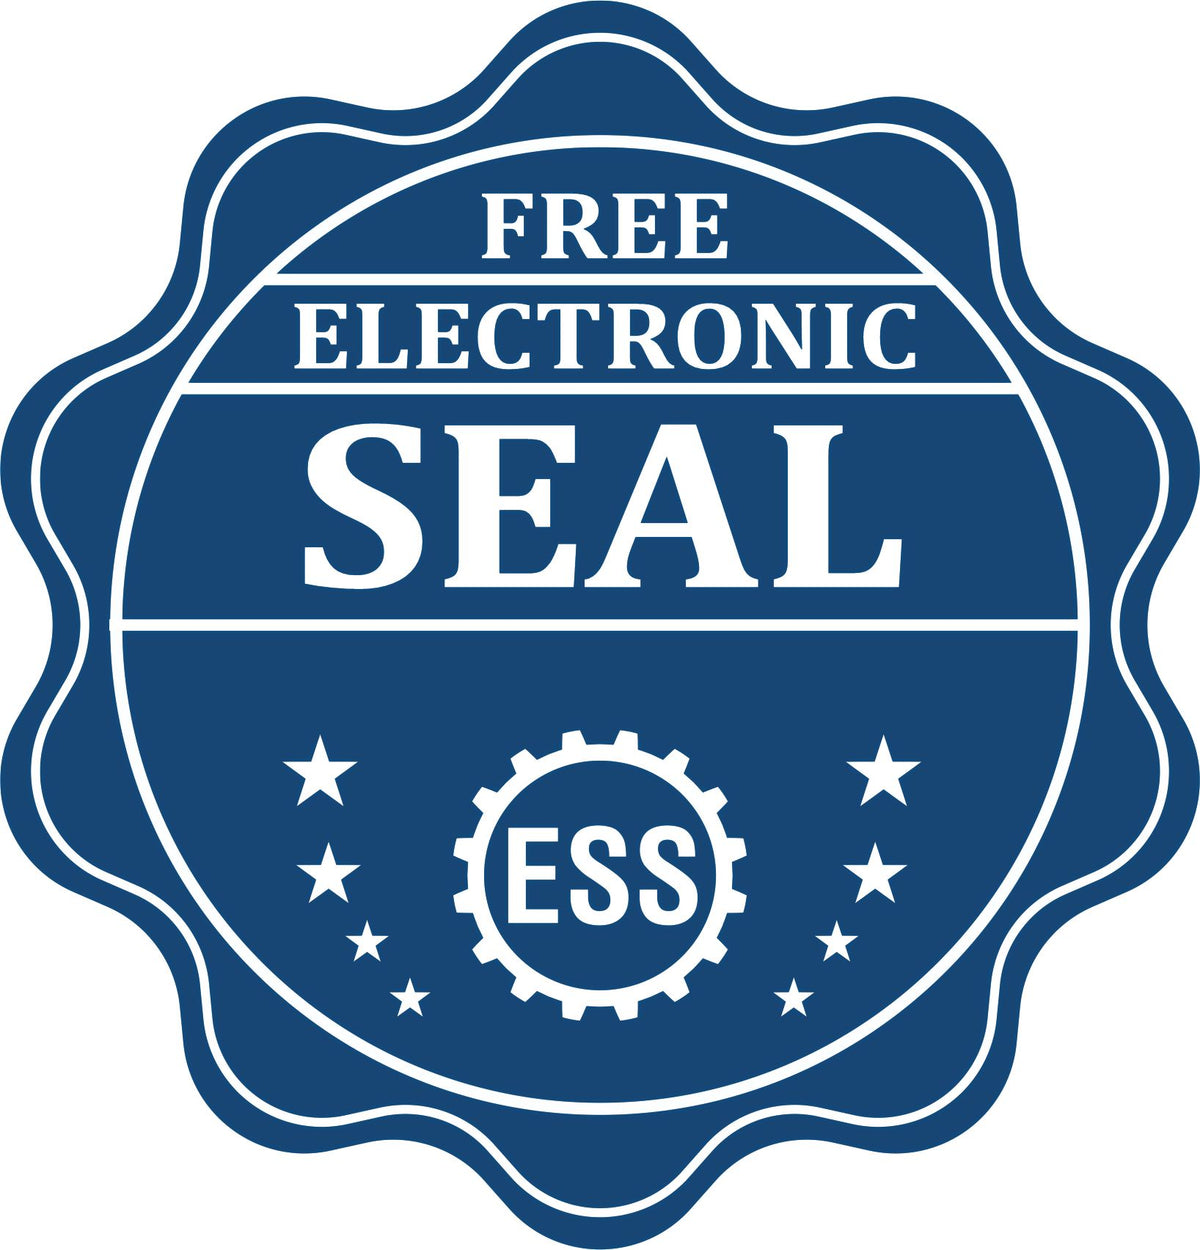 A badge showing a free electronic seal for the Heavy Duty Cast Iron North Carolina Engineer Seal Embosser with stars and the ESS gear on the emblem.